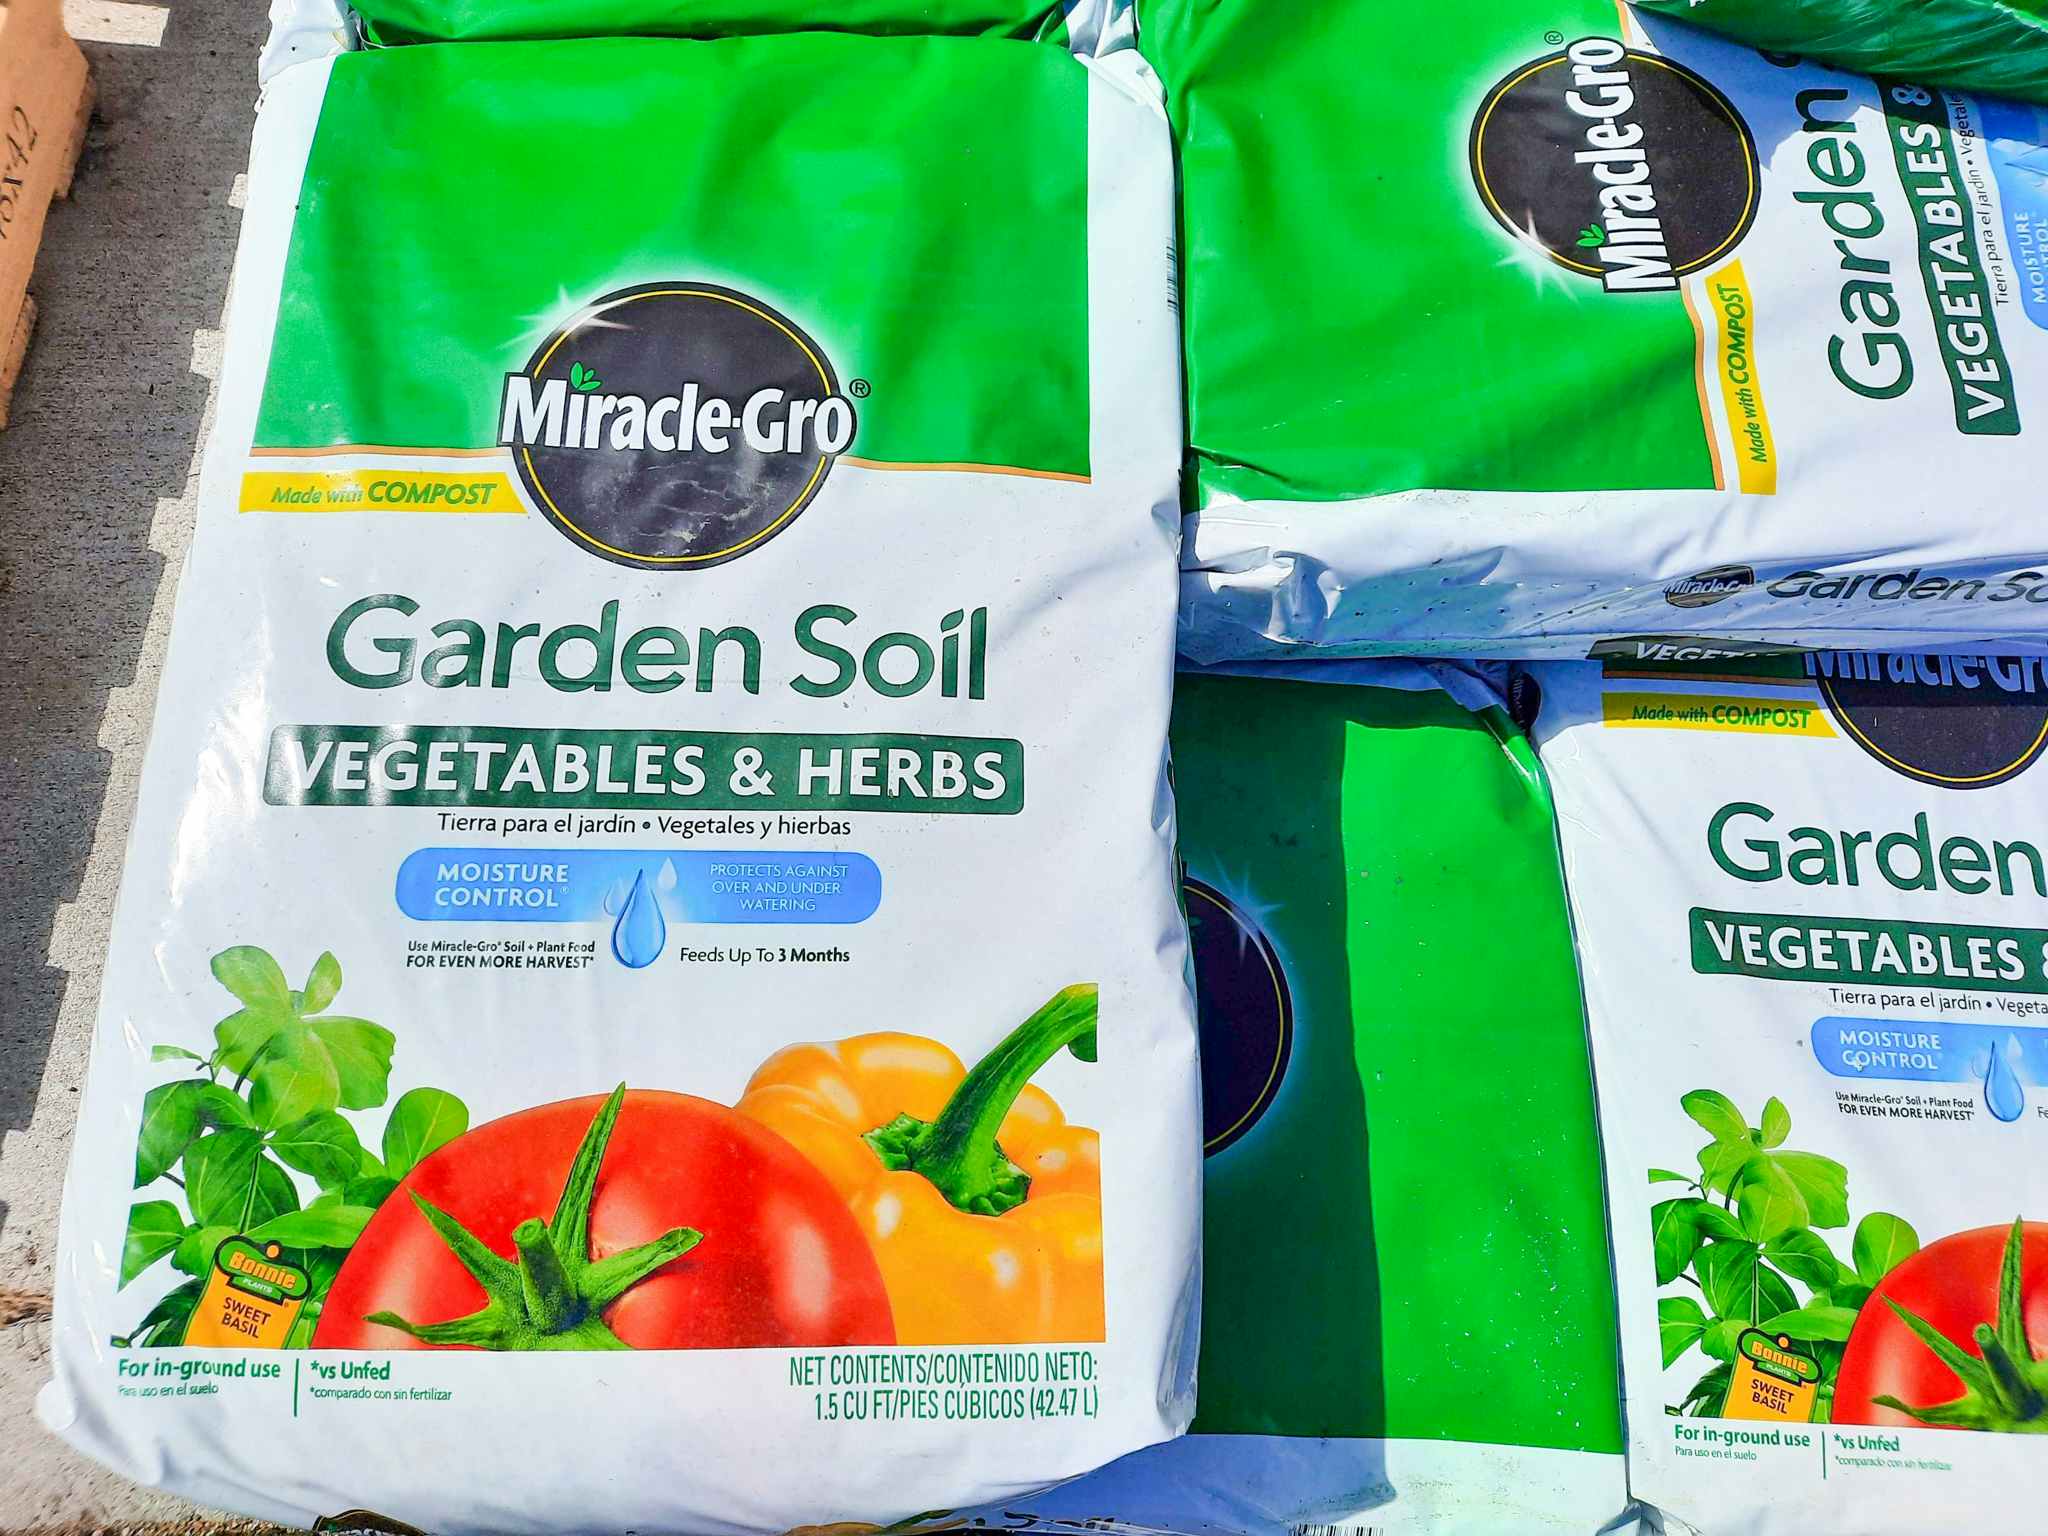 Miracle Gro Garden Soil Vegetables & Herbs at Ace Hardware